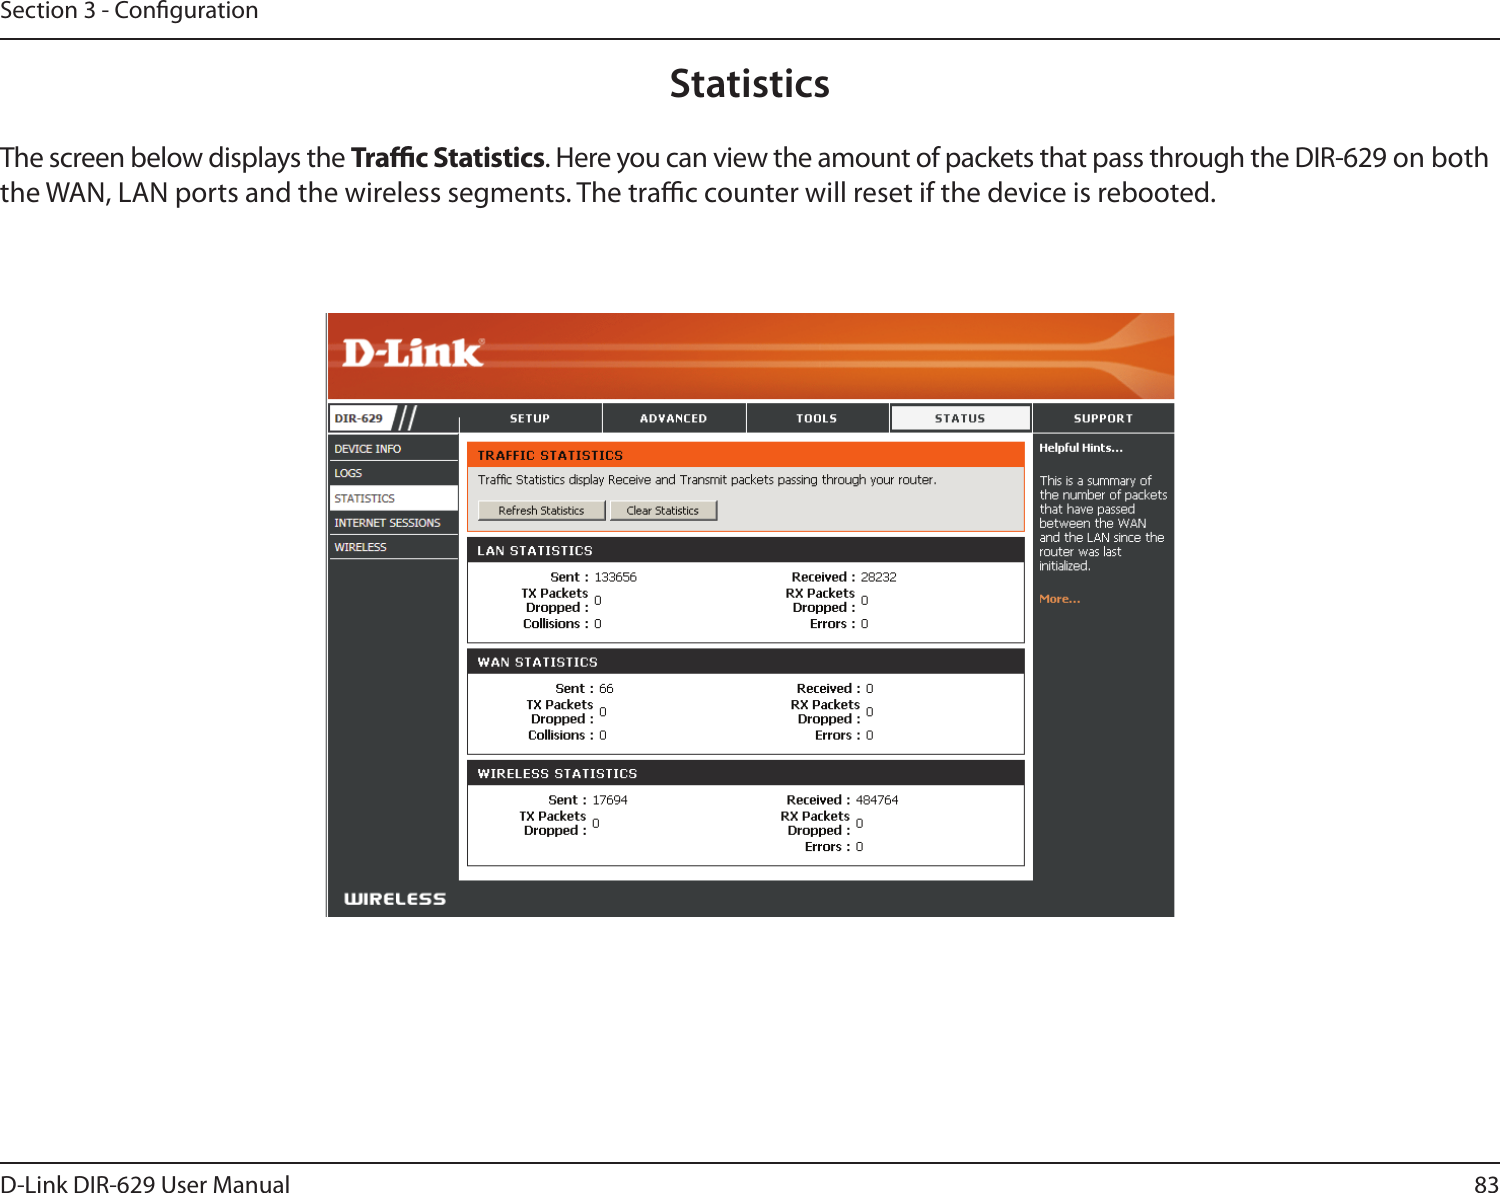 83D-Link DIR-629 User ManualSection 3 - CongurationStatisticsThe screen below displays the Trac Statisticsthe WAN, LAN ports and the wireless segments. The trac counter will reset if the device is rebooted.